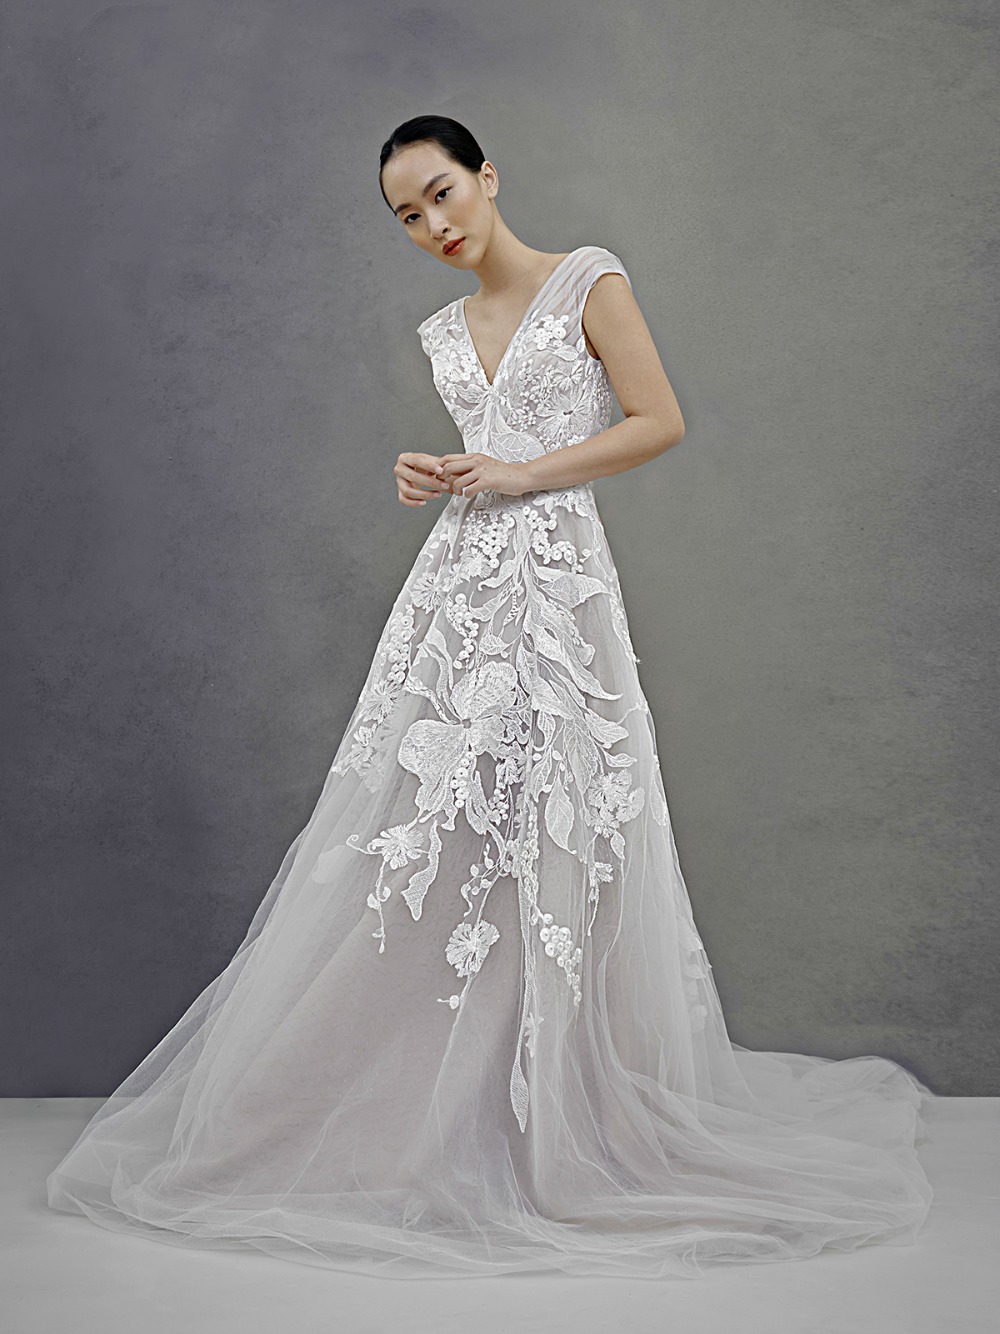 Naomi wedding dress by Ivy and Aster